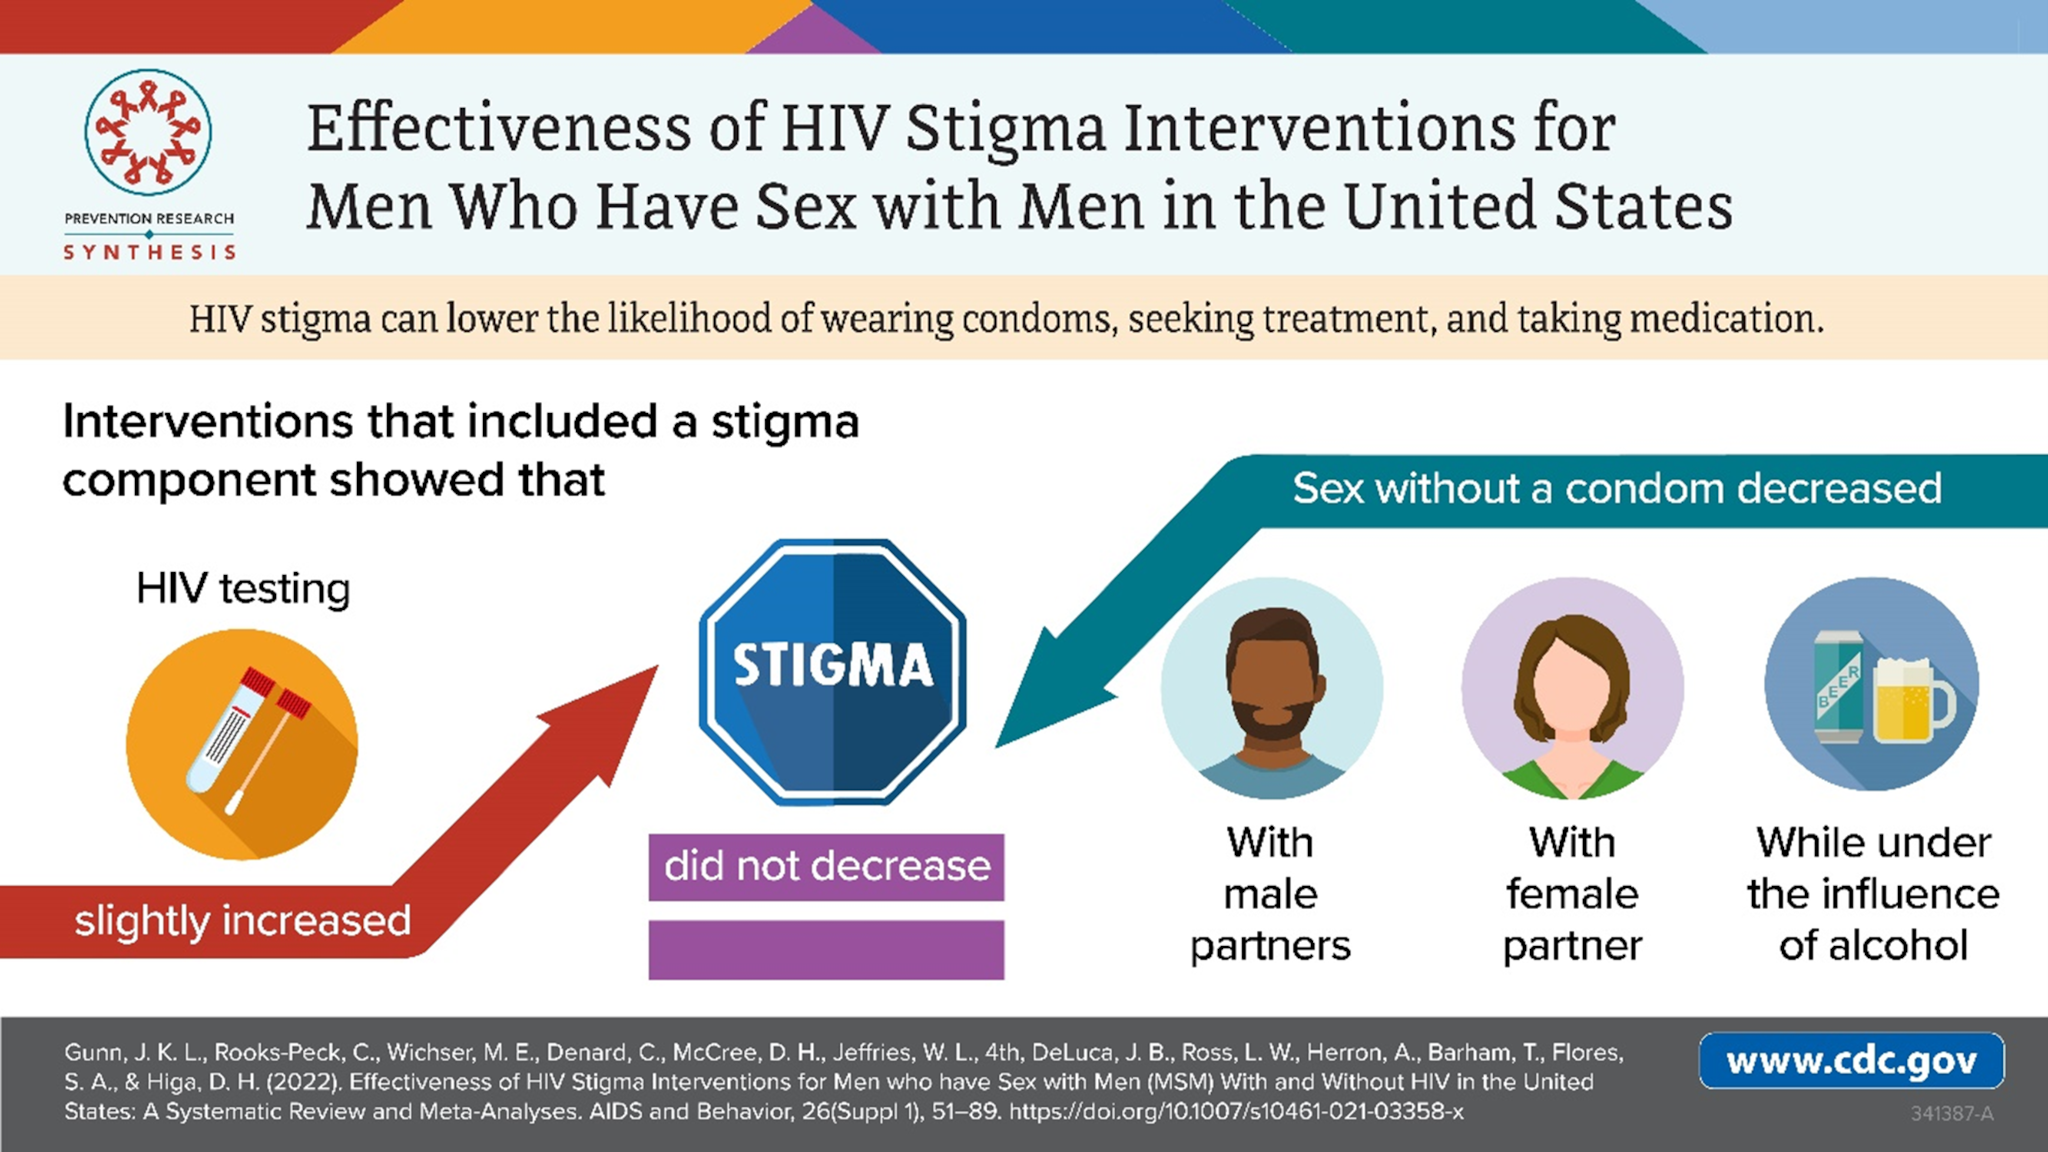 Effectiveness of HIV Stigma Interventions for Men Who Have Sex with Men in the United States